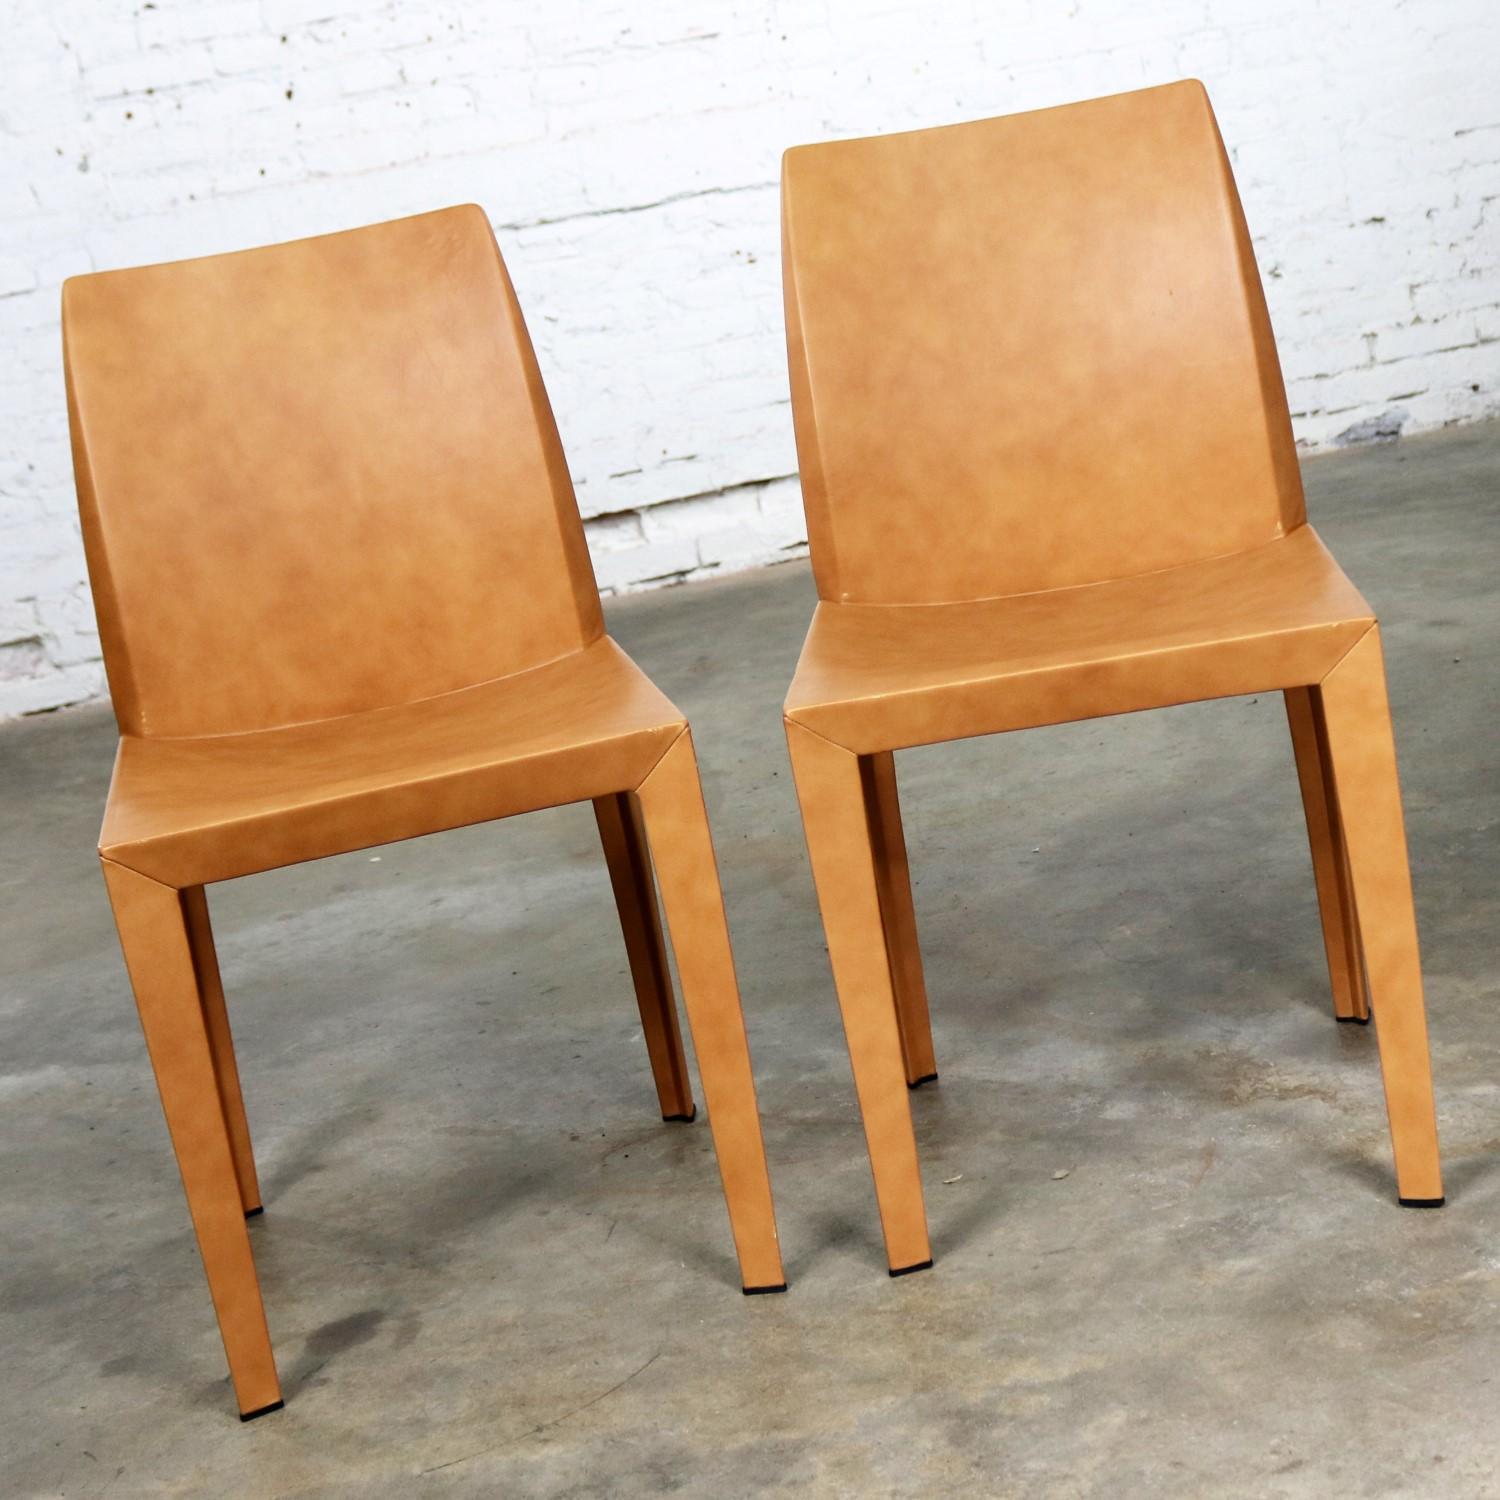 Handsome pair of Lola cognac colored leather dining side chairs. Designed by Pierluigi Cerri for Poltrona Frau in 1997. This vintage pair are in wonderful condition. There are small nicks and scratches as would come with age and use but nothing